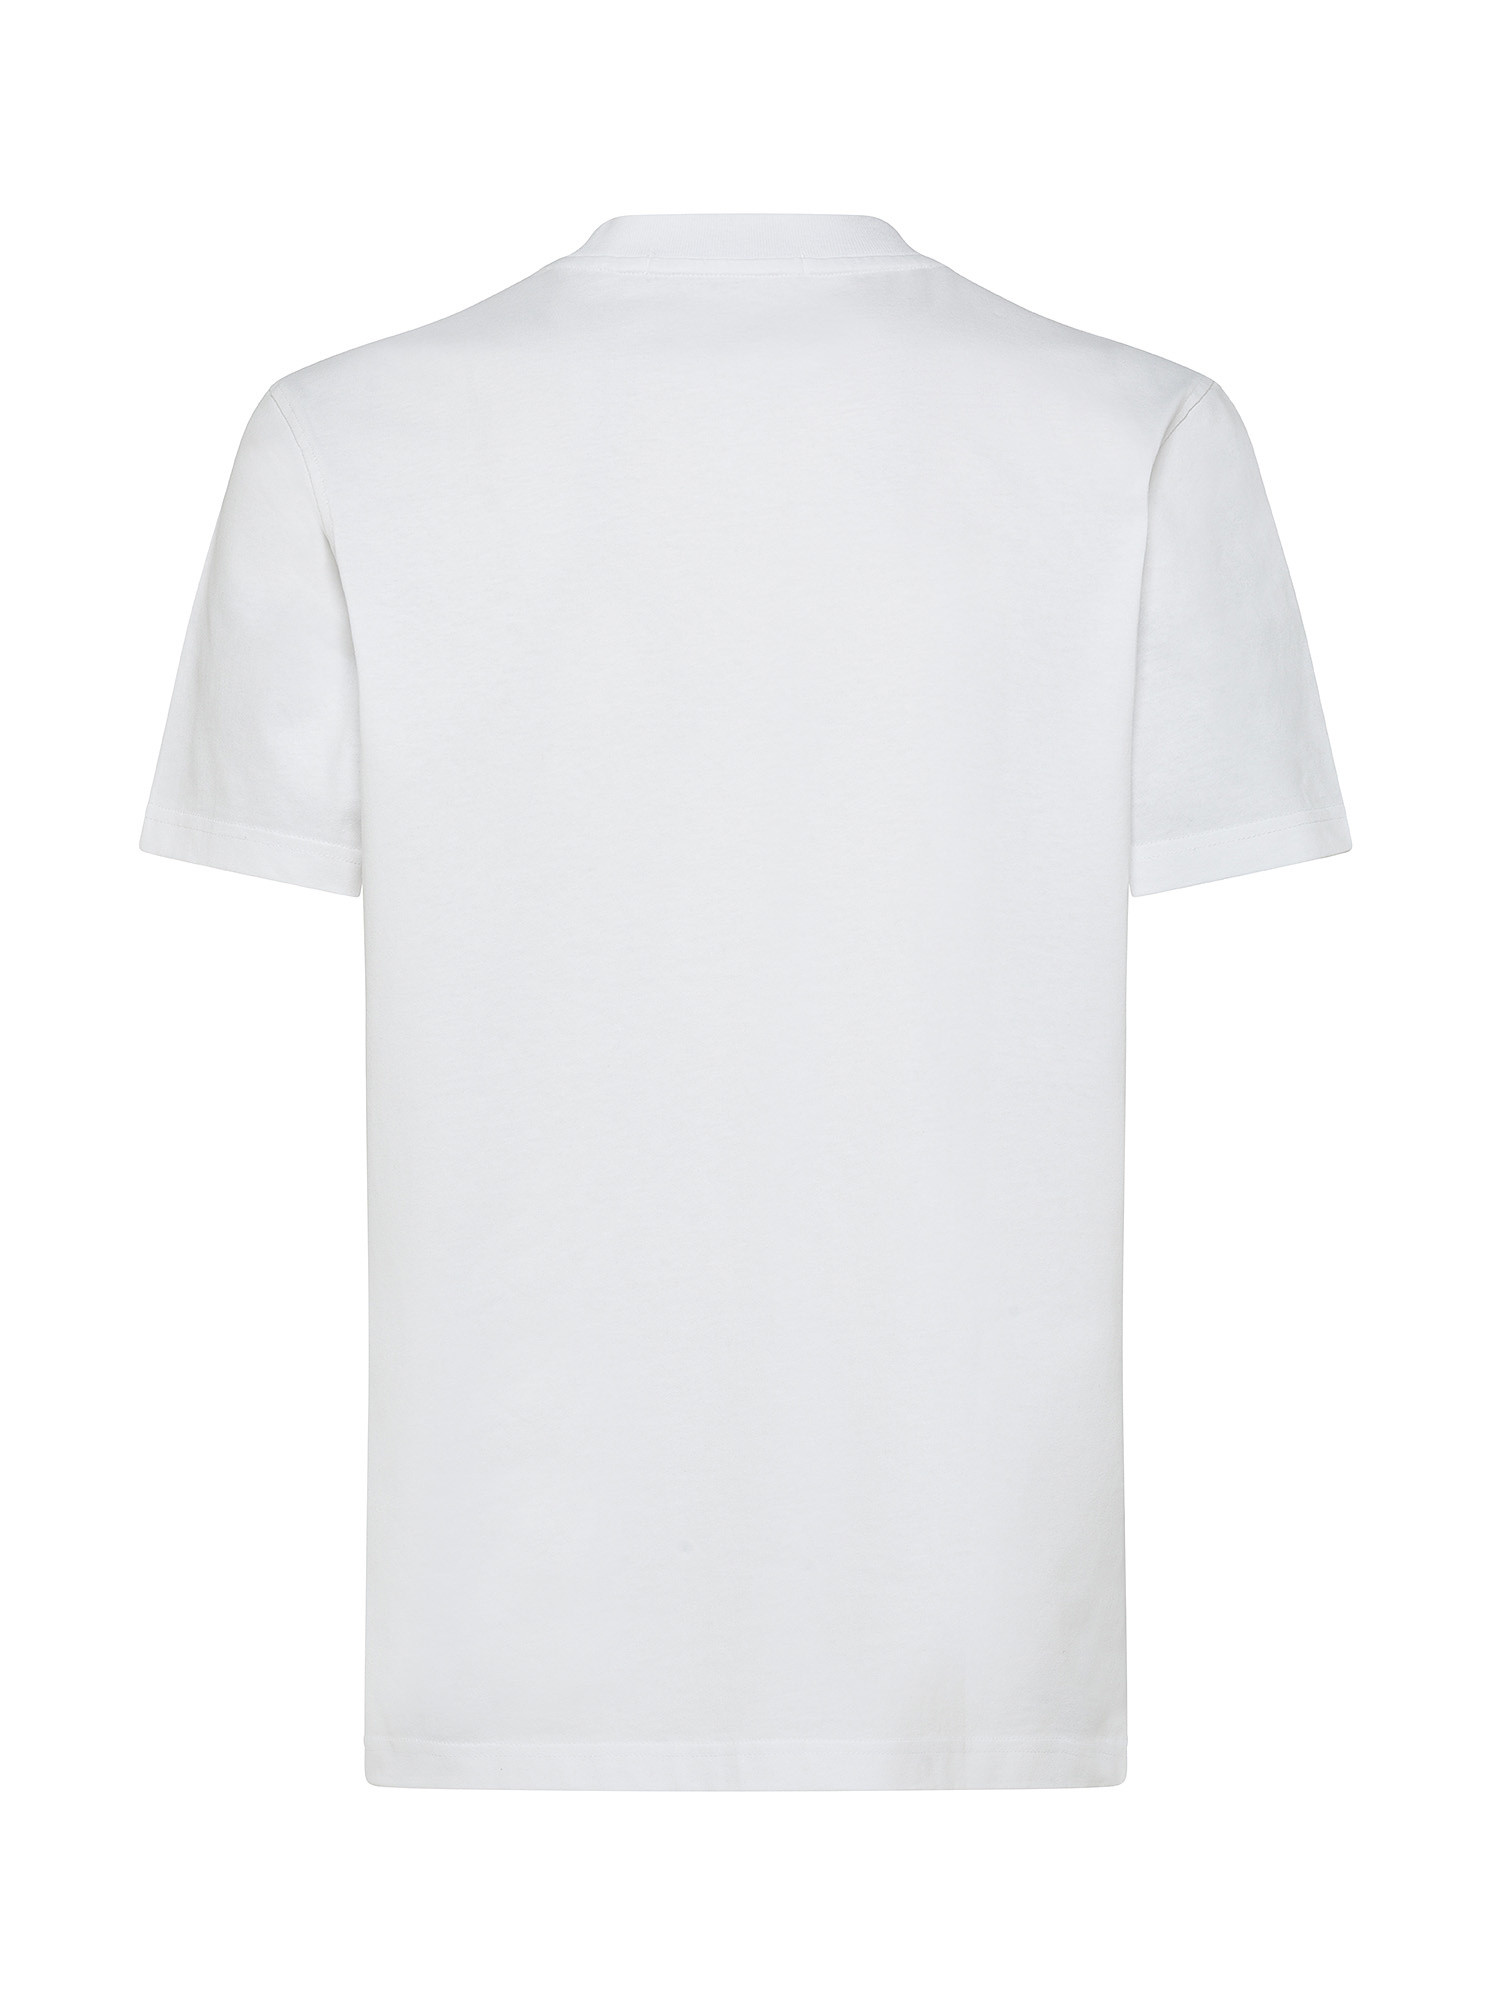 Calvin Klein Jeans - Recycled cotton T-shirt with logo, White, large image number 1